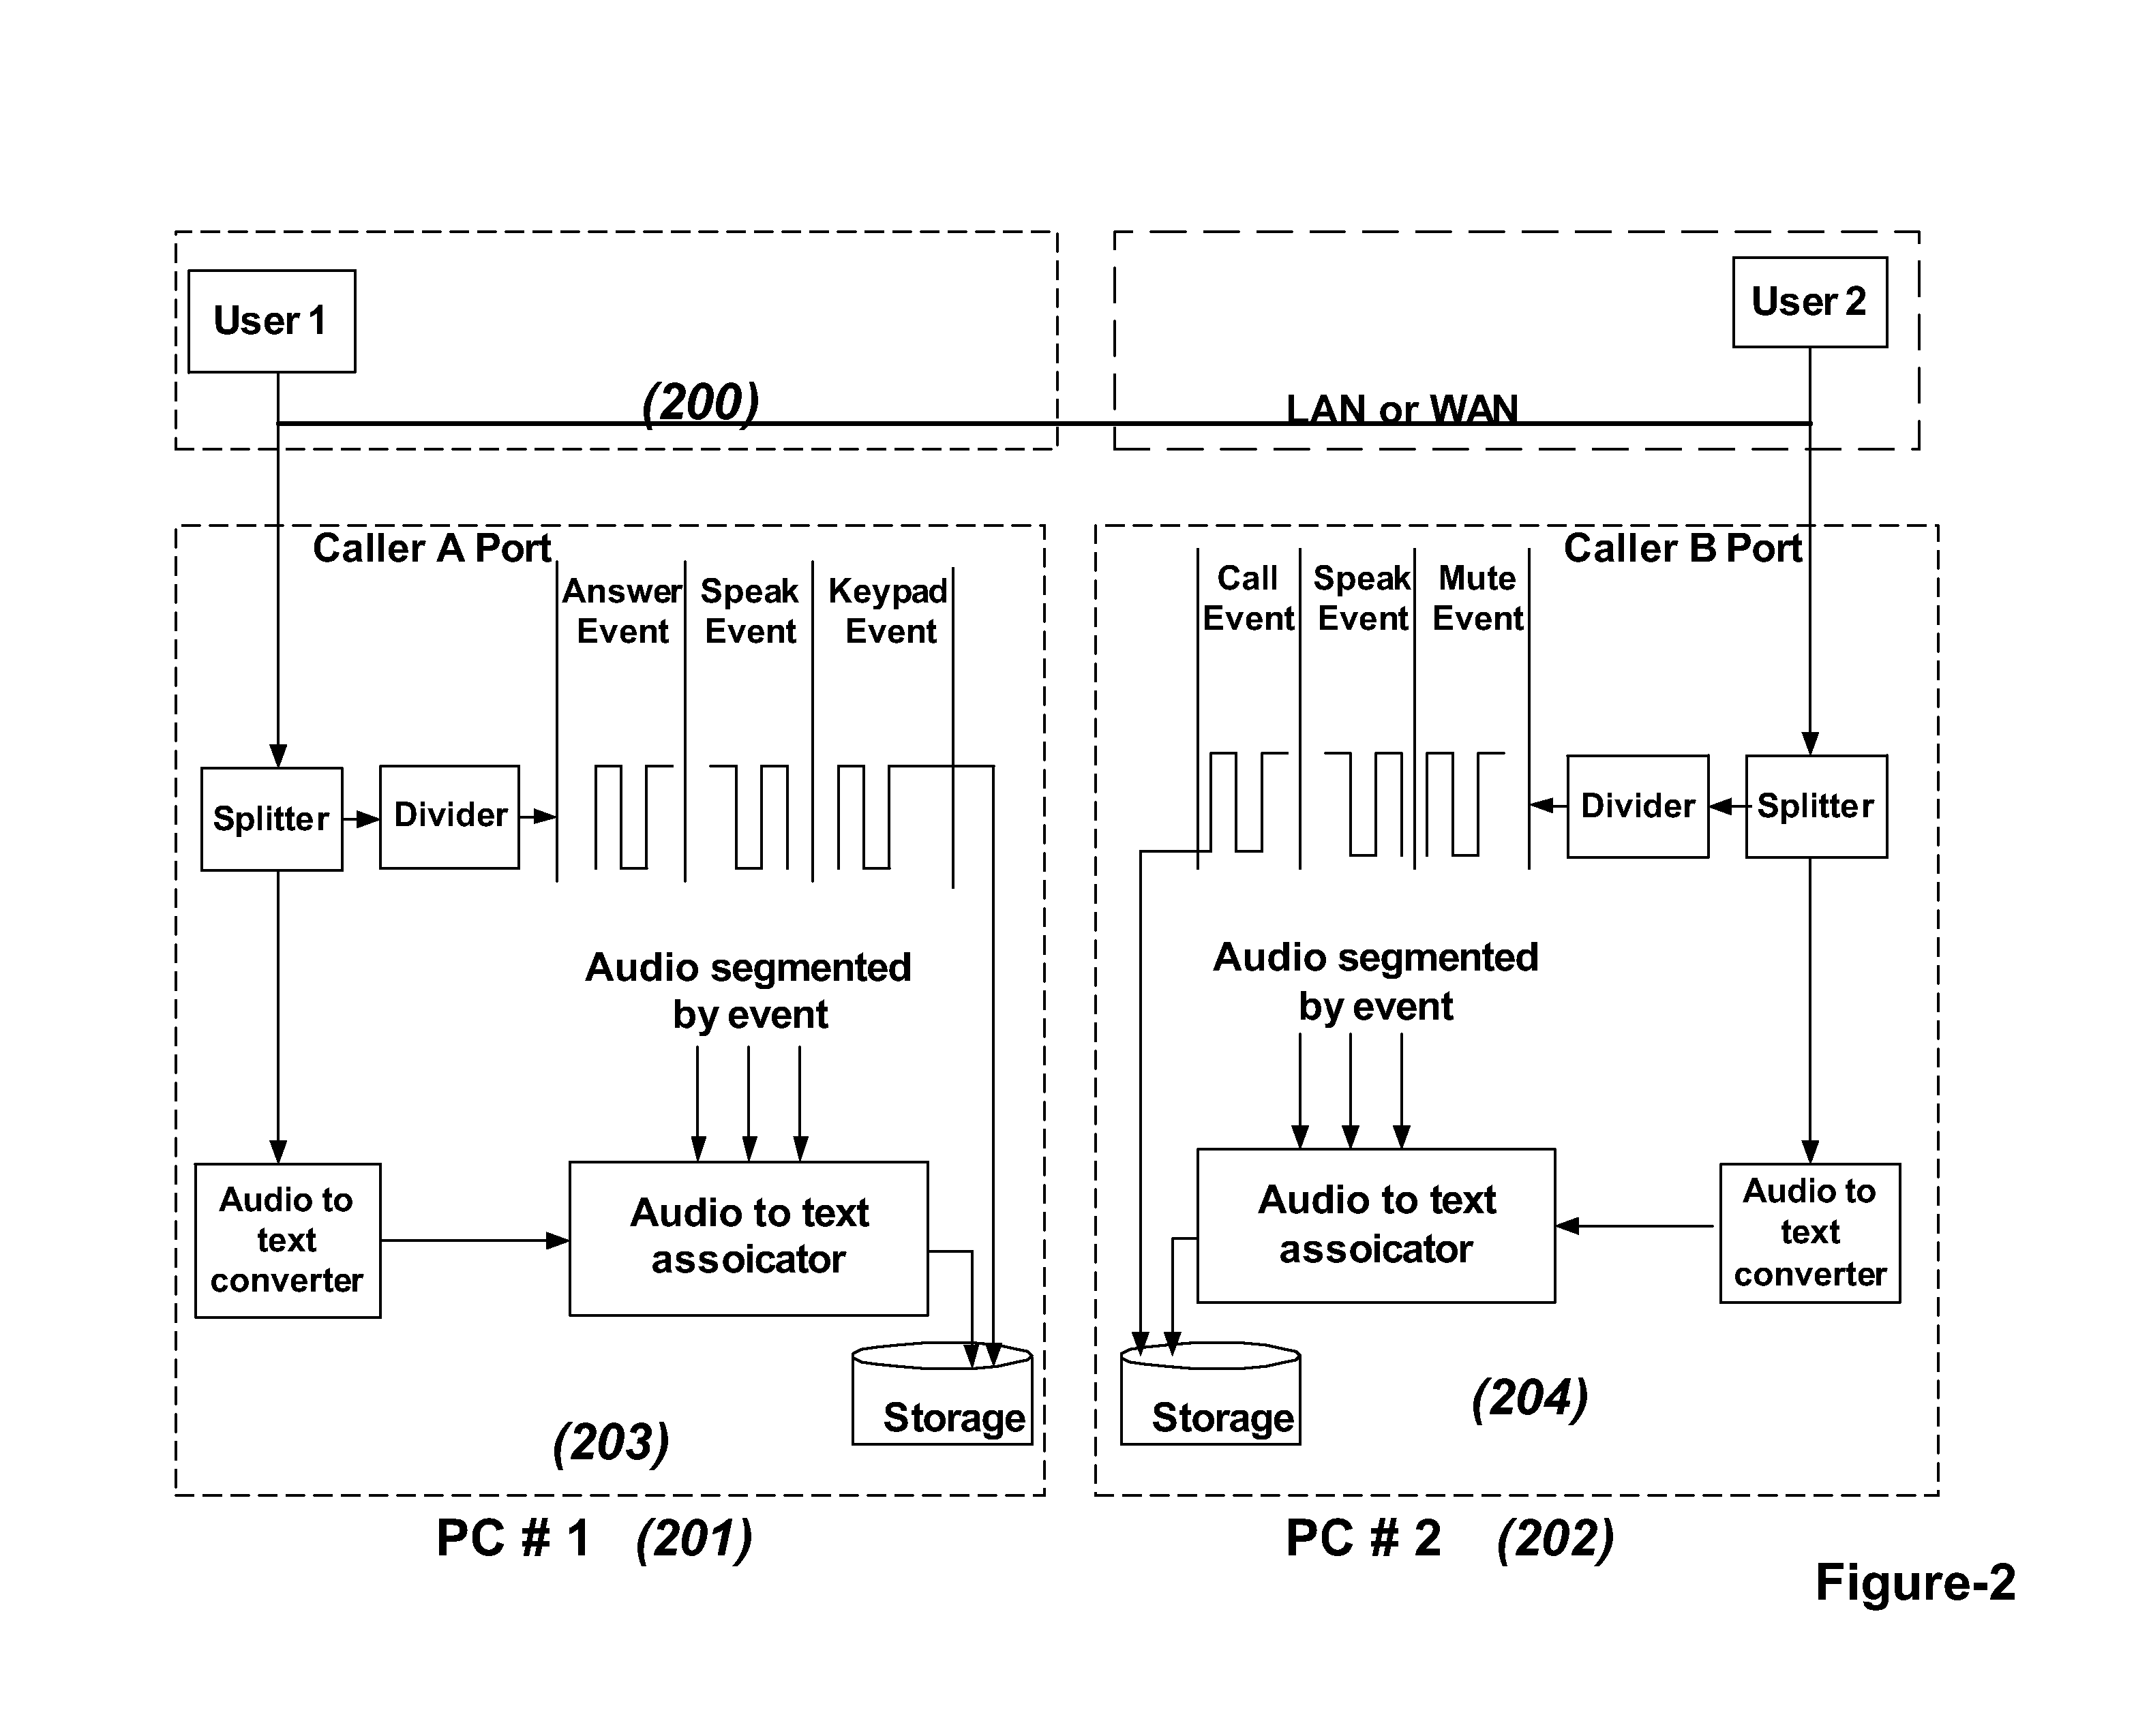 Enhancement of simultaneous multi-user real-time speech recognition system